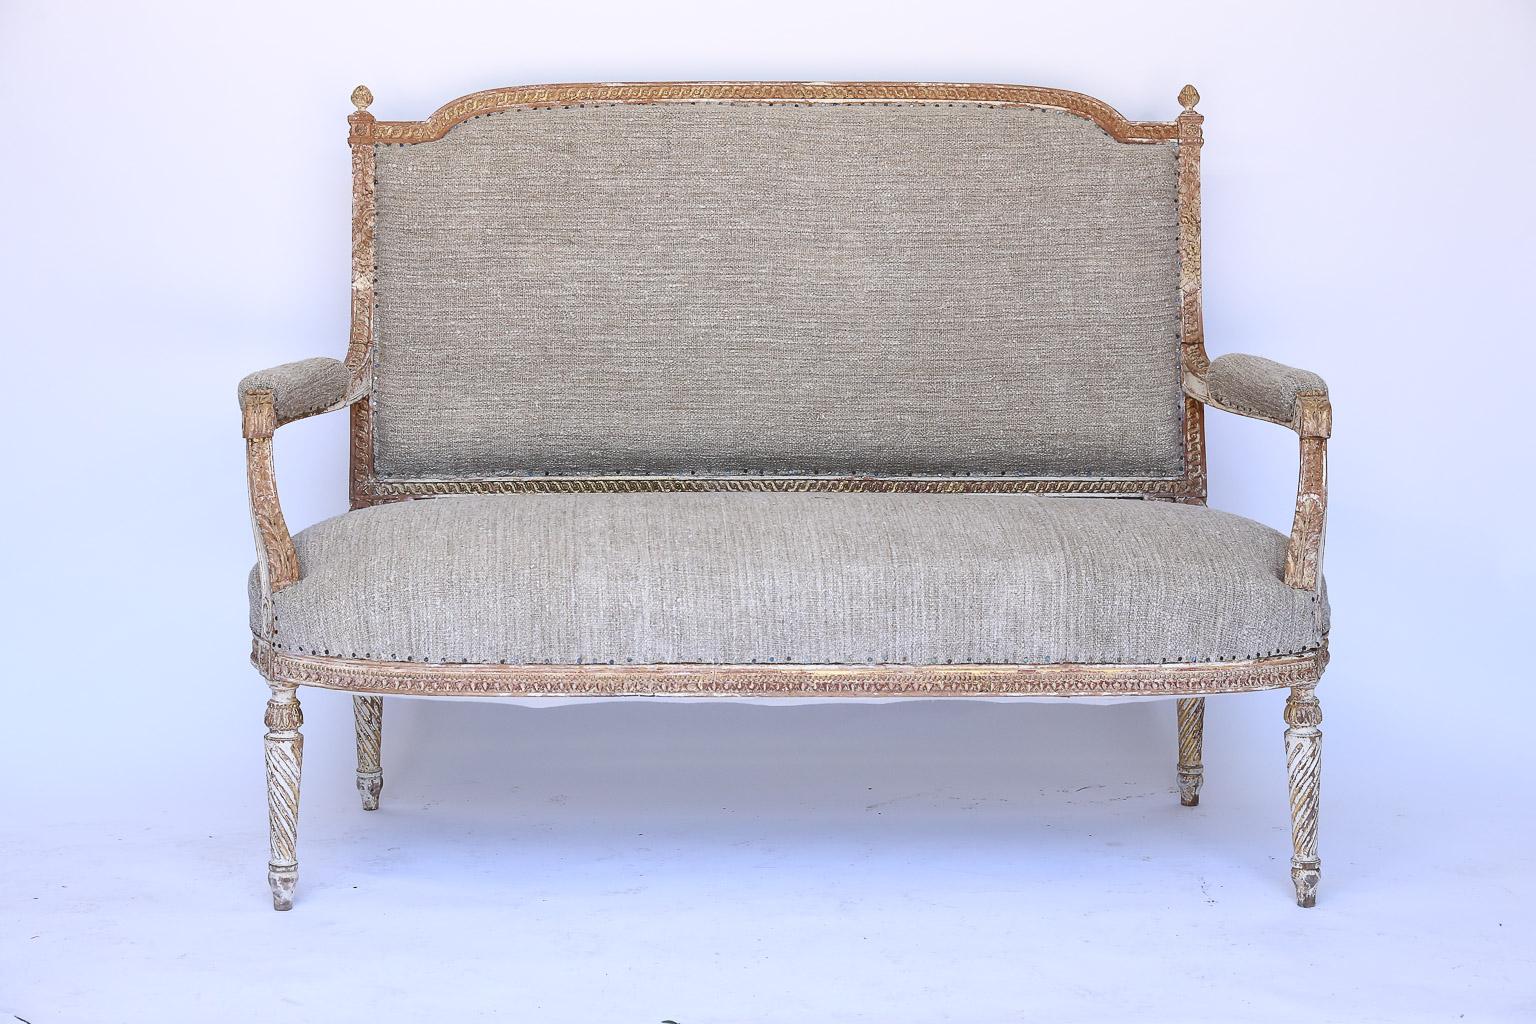 This is a beautiful antique French banquette. The banquette is strong, sturdy and upholstered in vintage French linen fabric that is enhanced by small tacks.